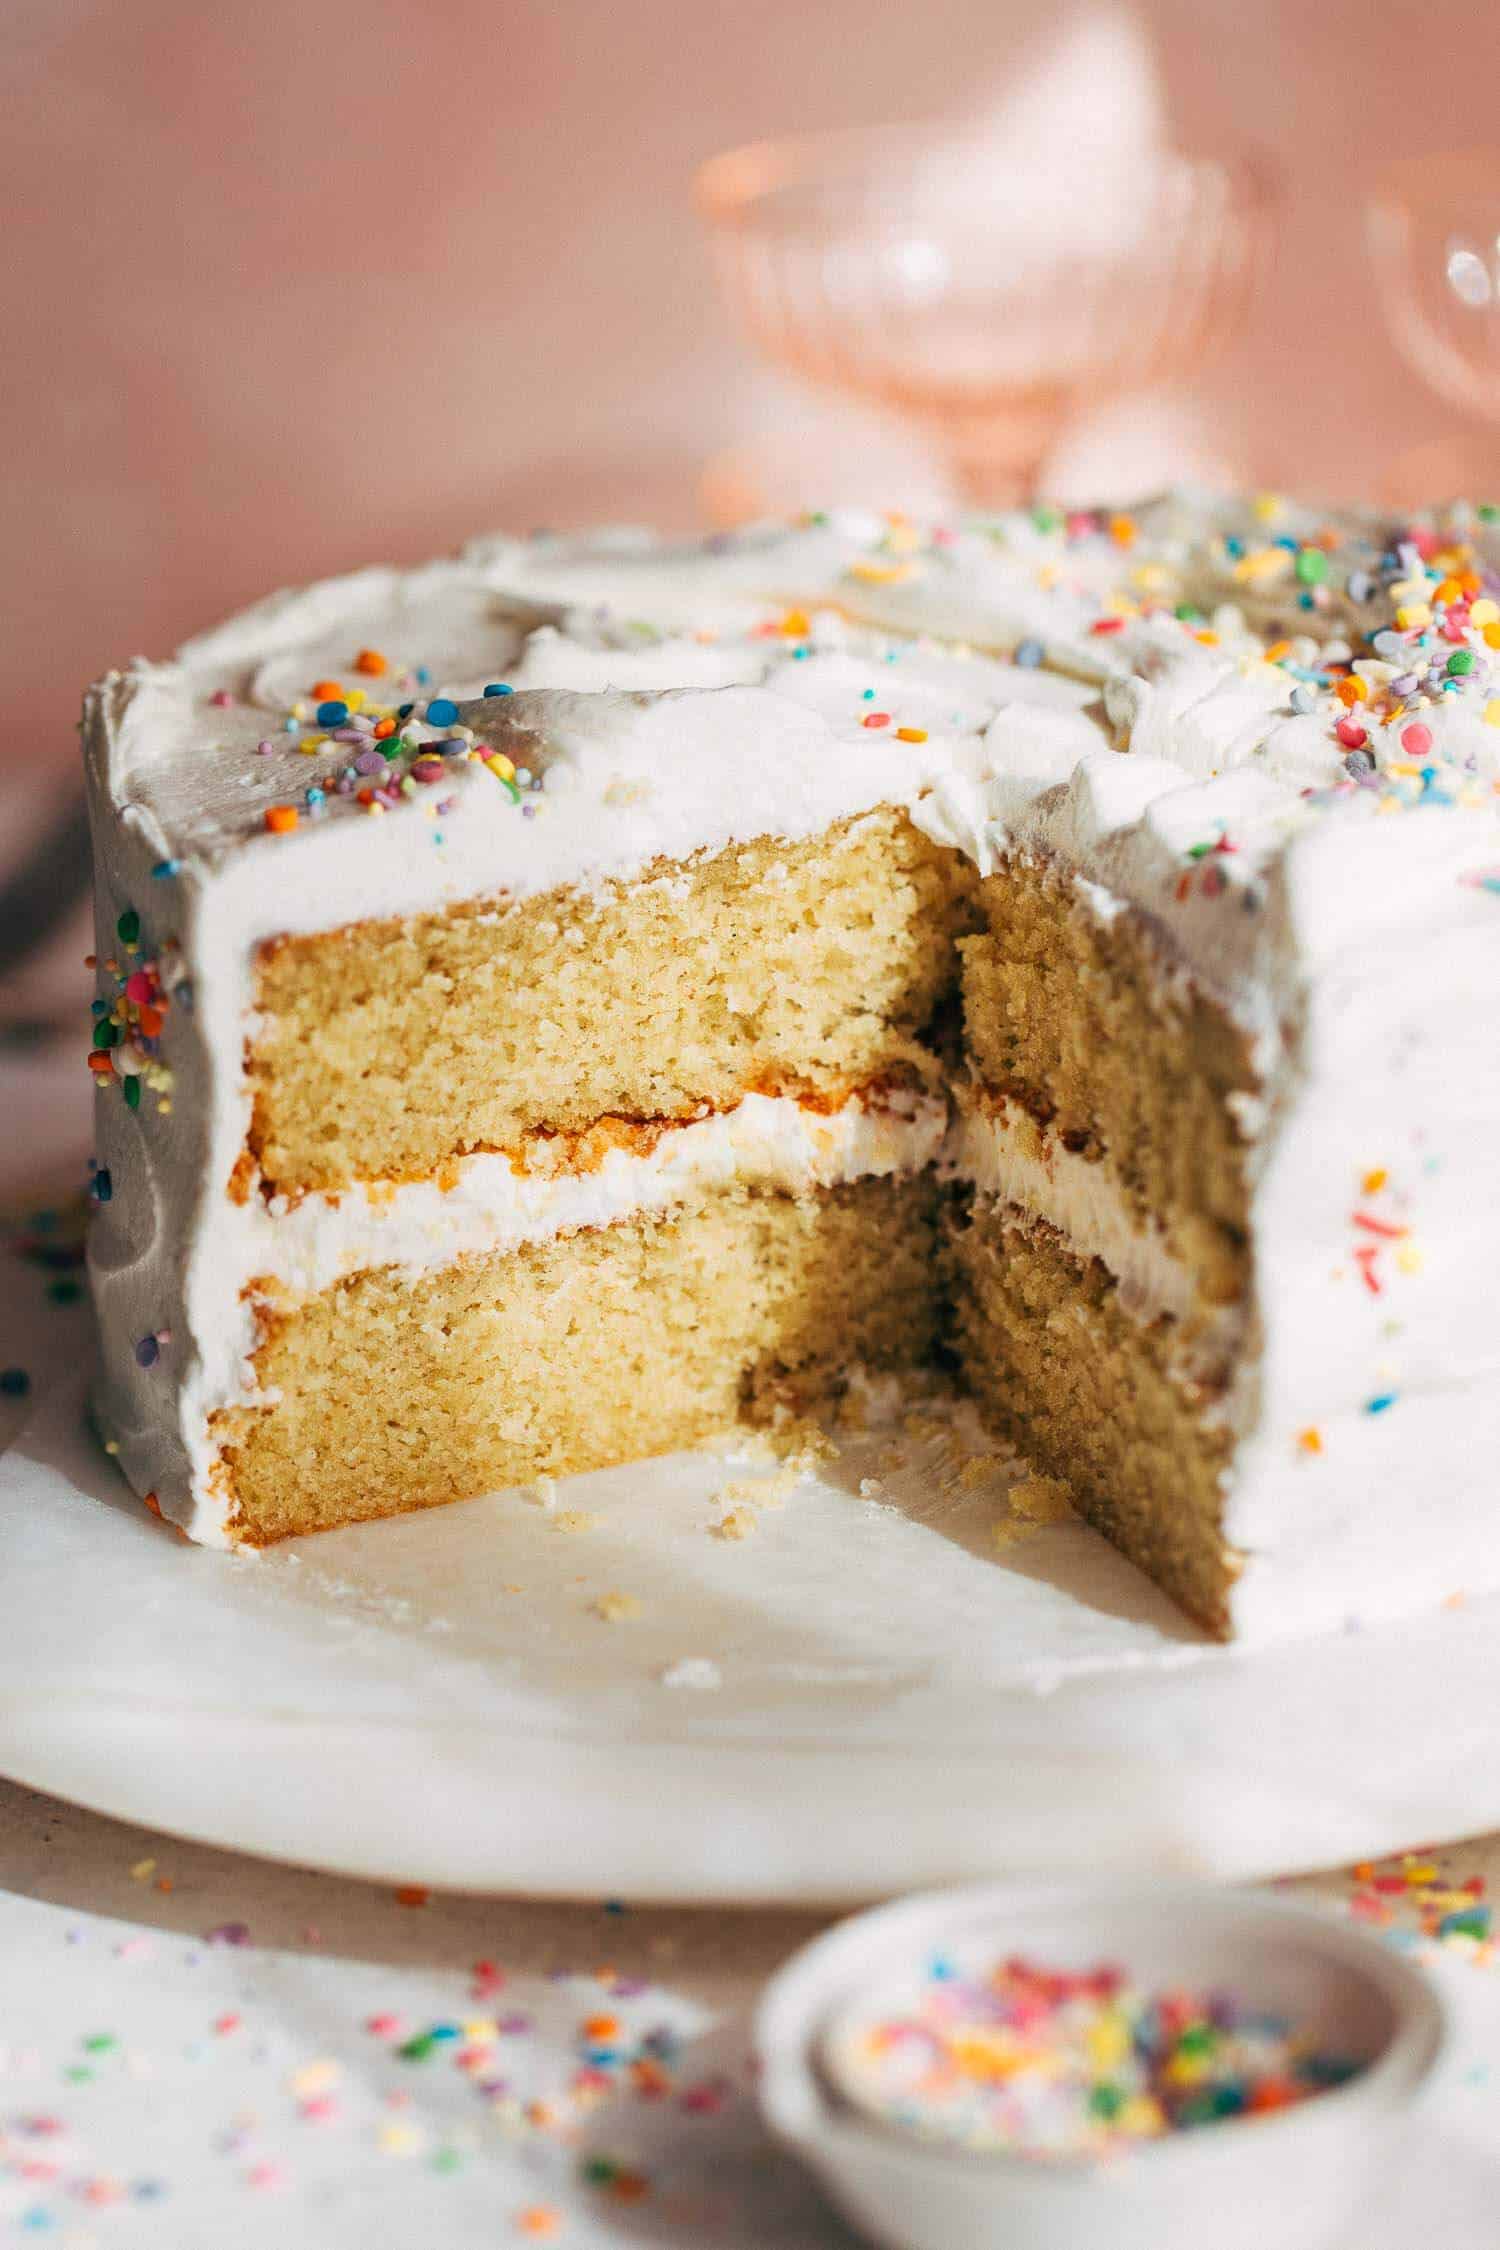 10 Best Gluten Free Cake Recipes - Eat With Clarity